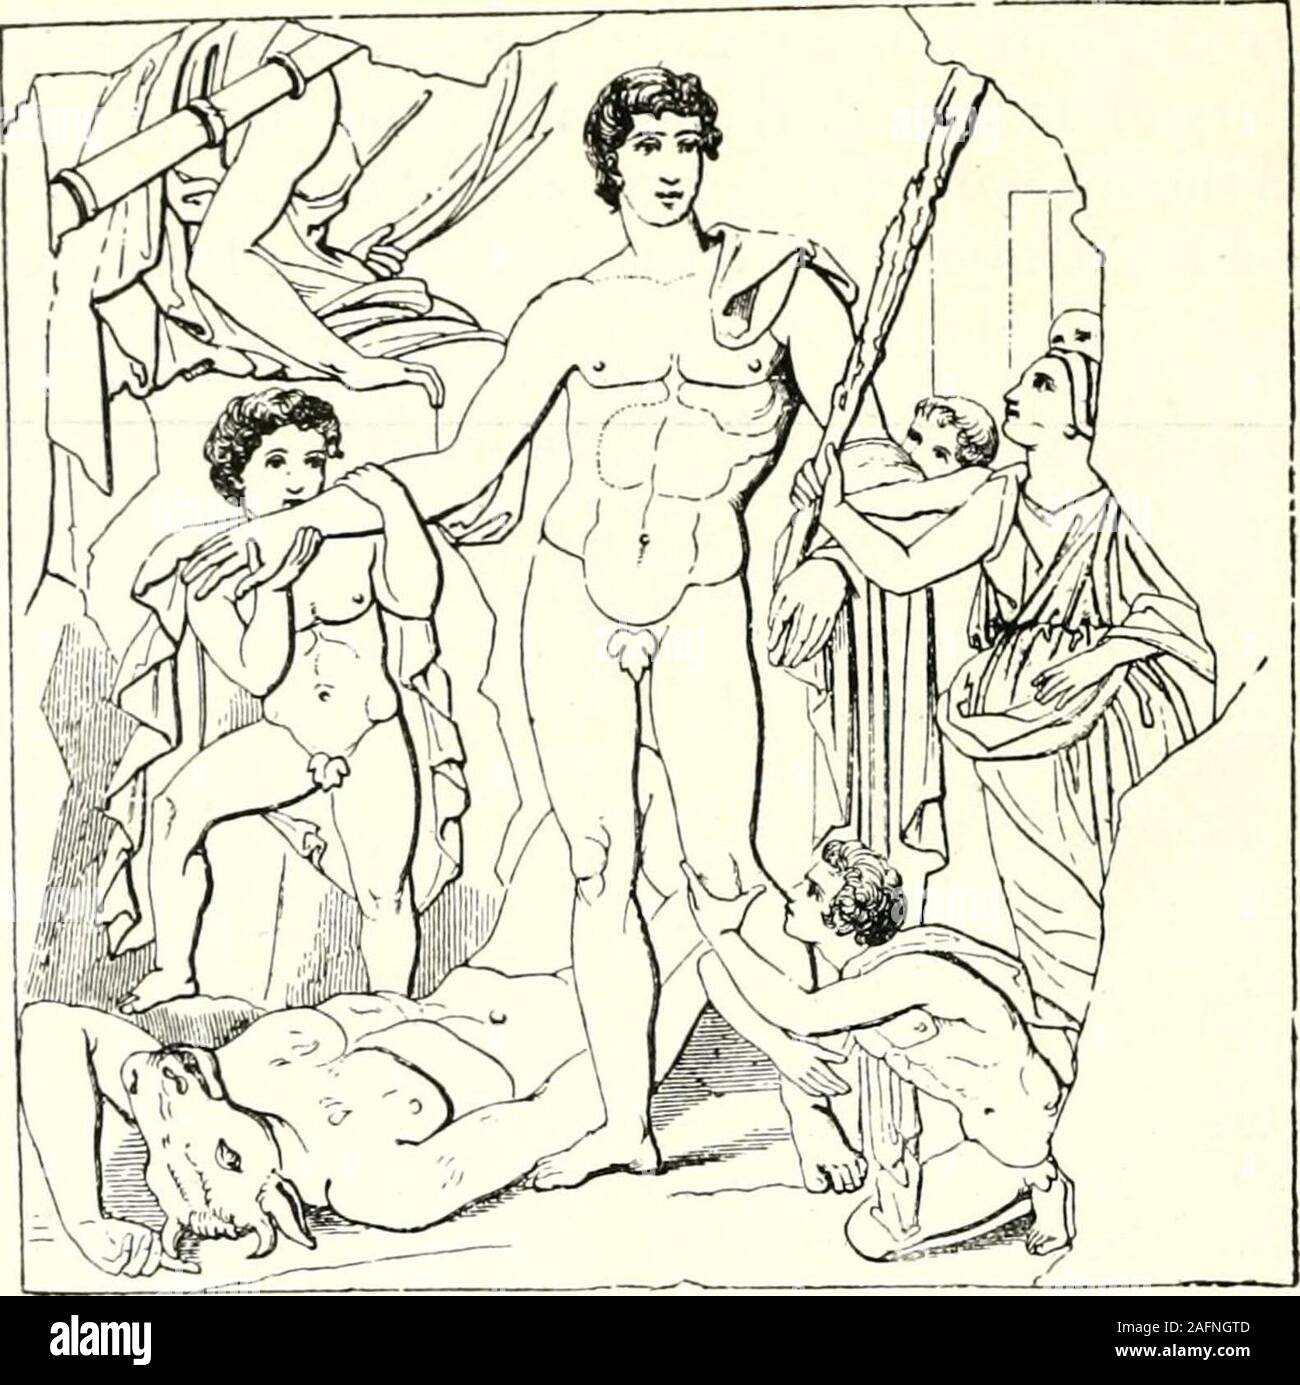 . The Open court. Perseus Liberating Andromeda.Ancient relief. Capitol. (From Springer, Hatidb., p. 256.) else than the Greek form of the Semitic title of God, Adon, i. e..Lord, a word which is used in the same significance in the Bible.Adon, the sun-god and husband of Astarte, the Phoenician Venus,dies and is resurrected. He is the same as Tammuz for whom, asthe prophet Ezekiel, Jewish women wept in the temple. 656 THE OPEN COURT.. Theseus, the Slayer of the Minotaur, Receiving the thanks of the rescued victims.^ (Fresco in the Campagna from Mus. Borb., X., 50.) i^vi? Stock Photo